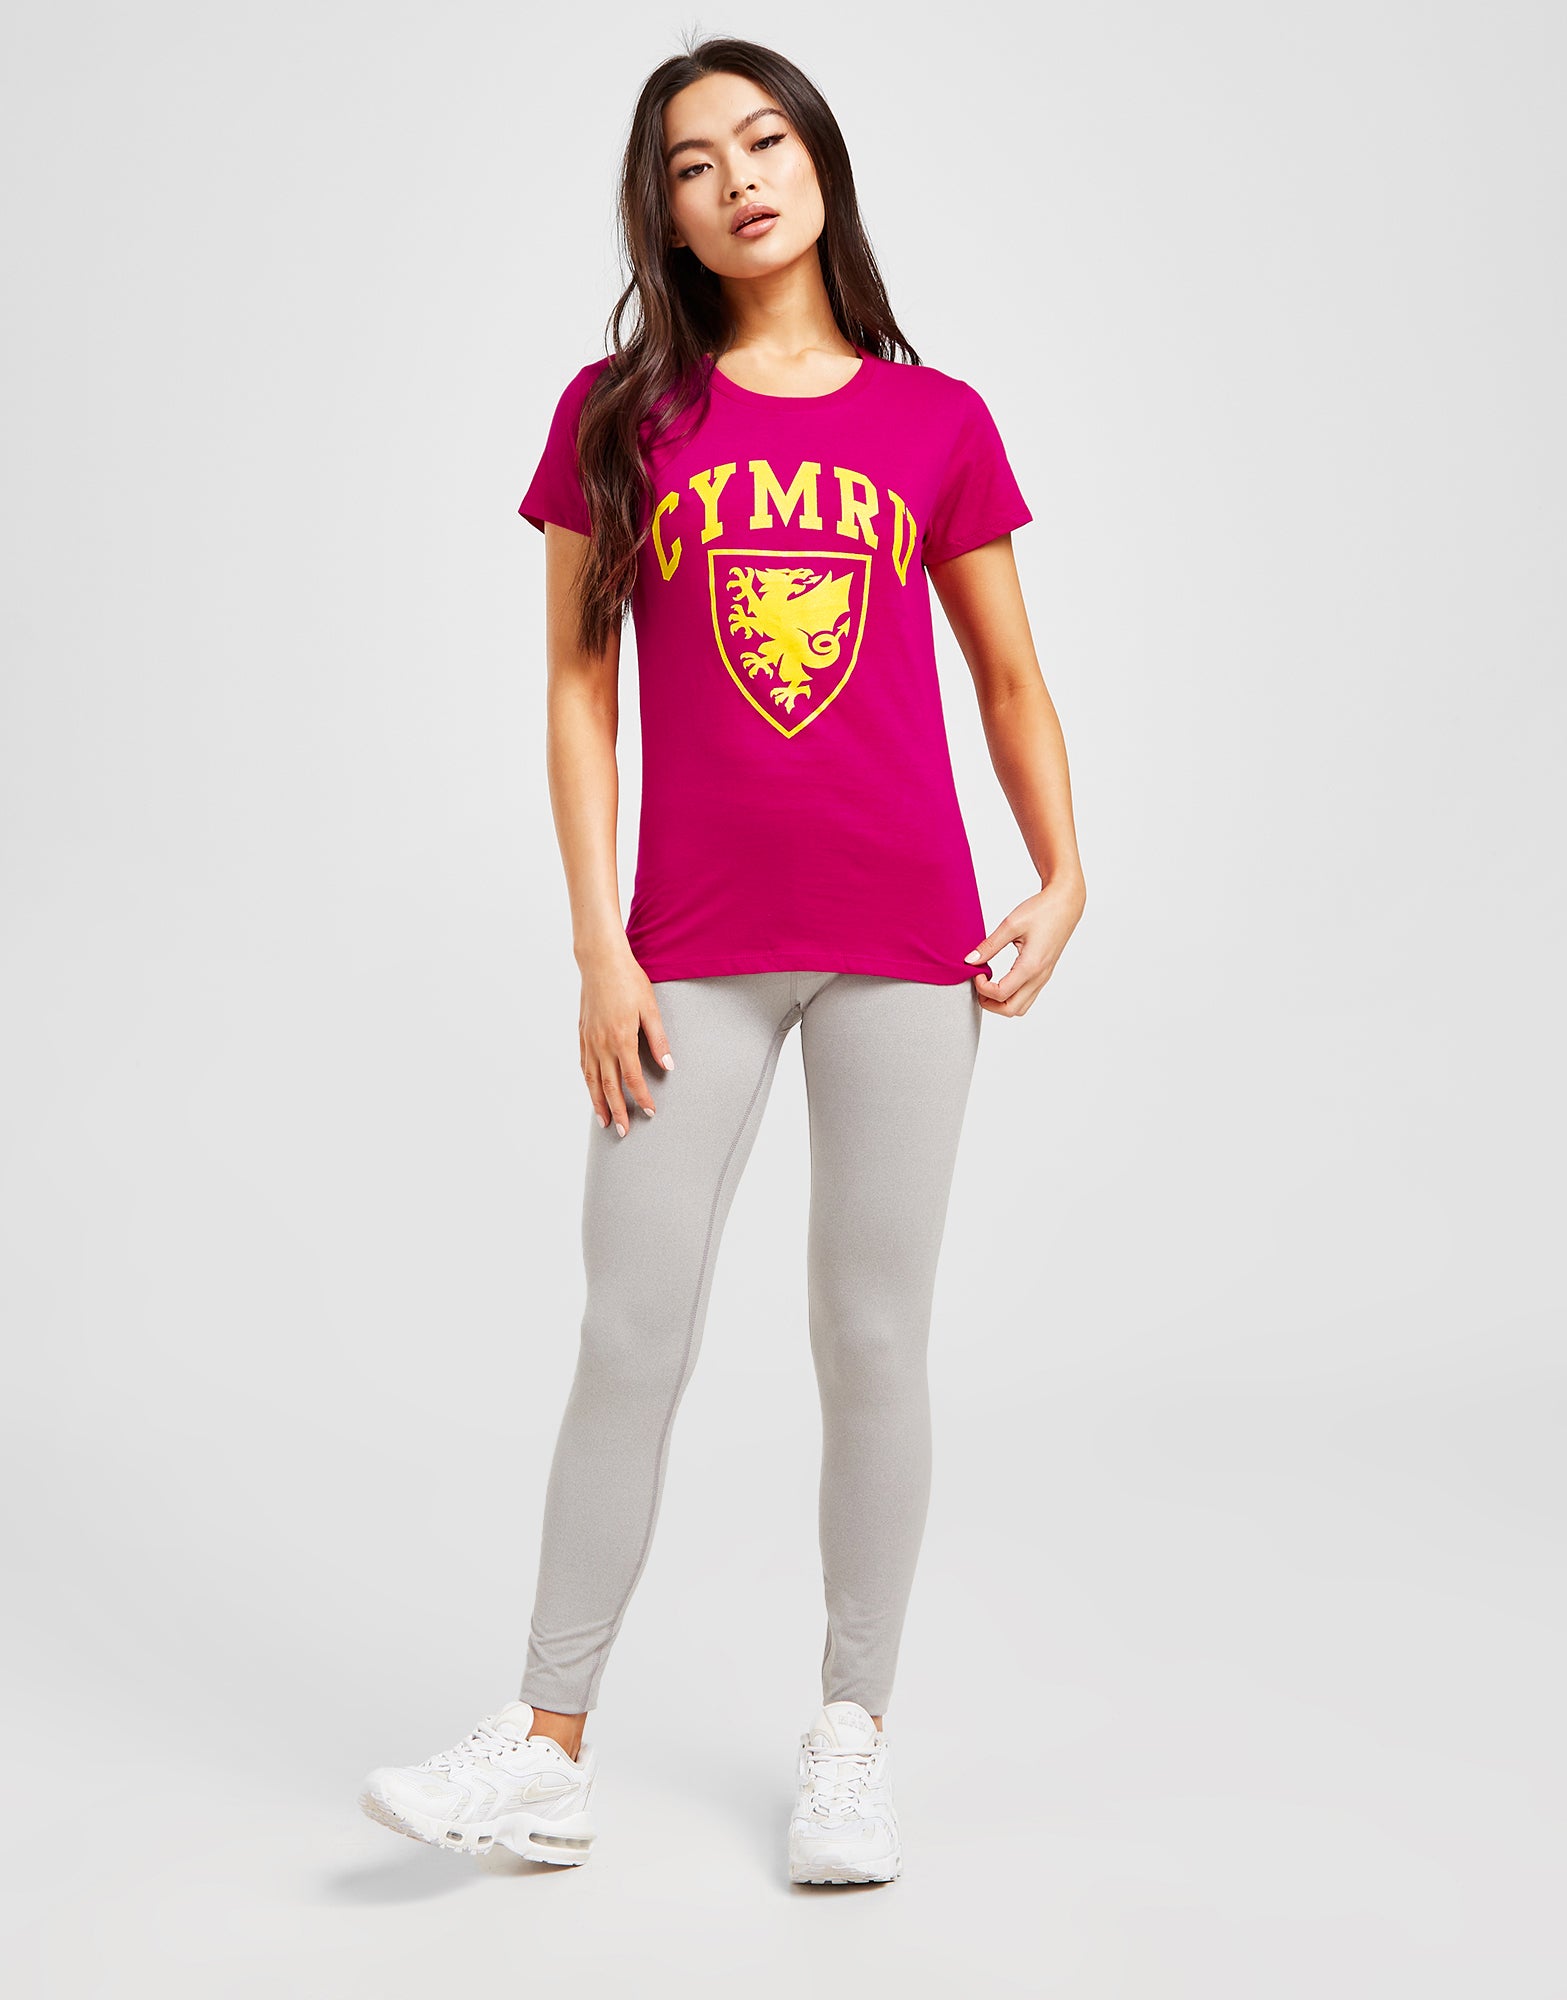 Official Team Wales Womens T-Shirt - Pink - The World Football Store